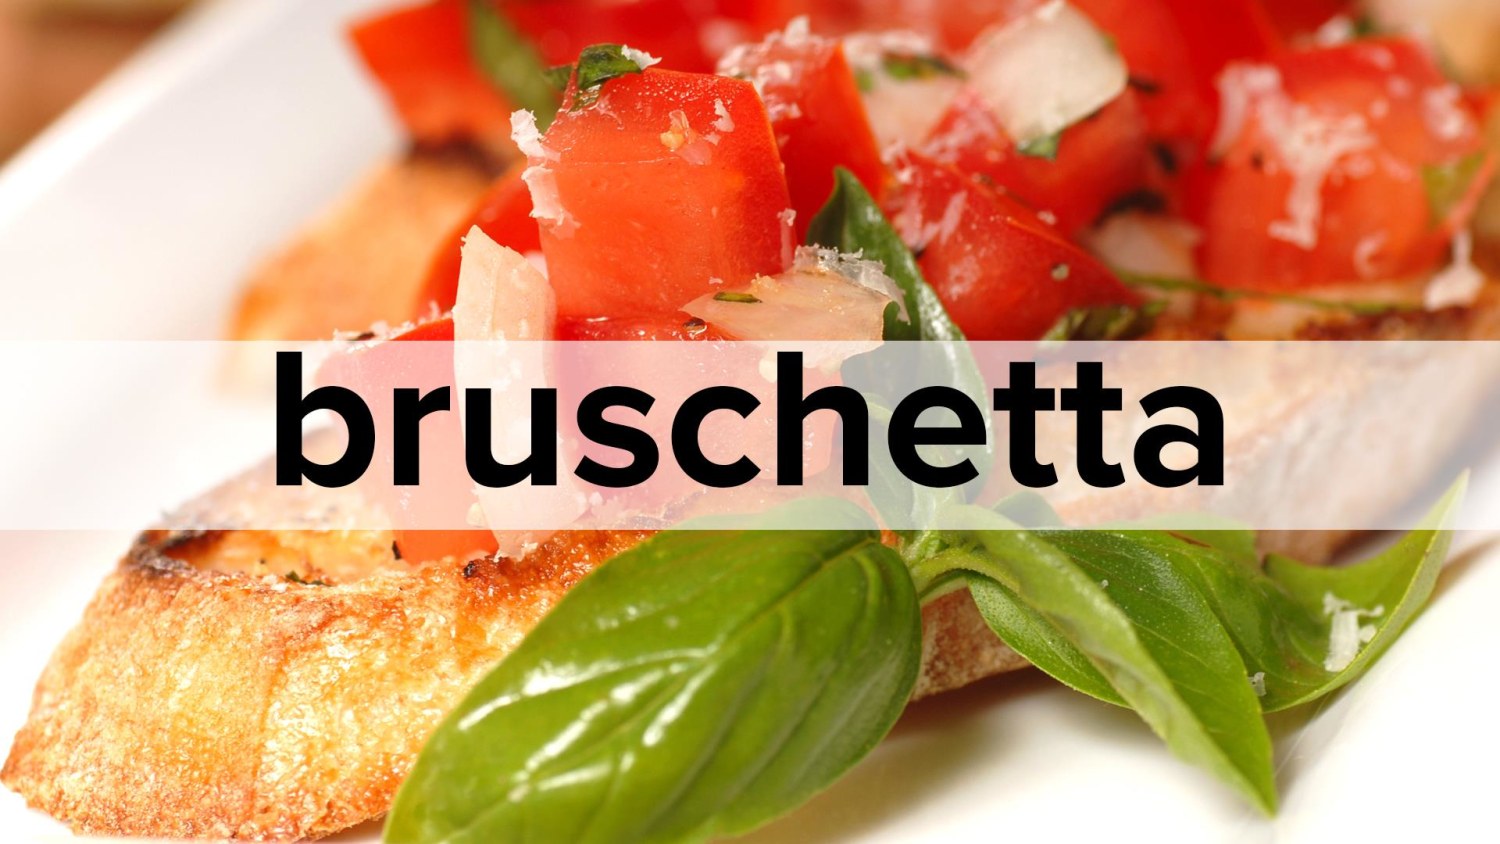 27 Mispronounced Brand Names And How To Actually Pronounce Them